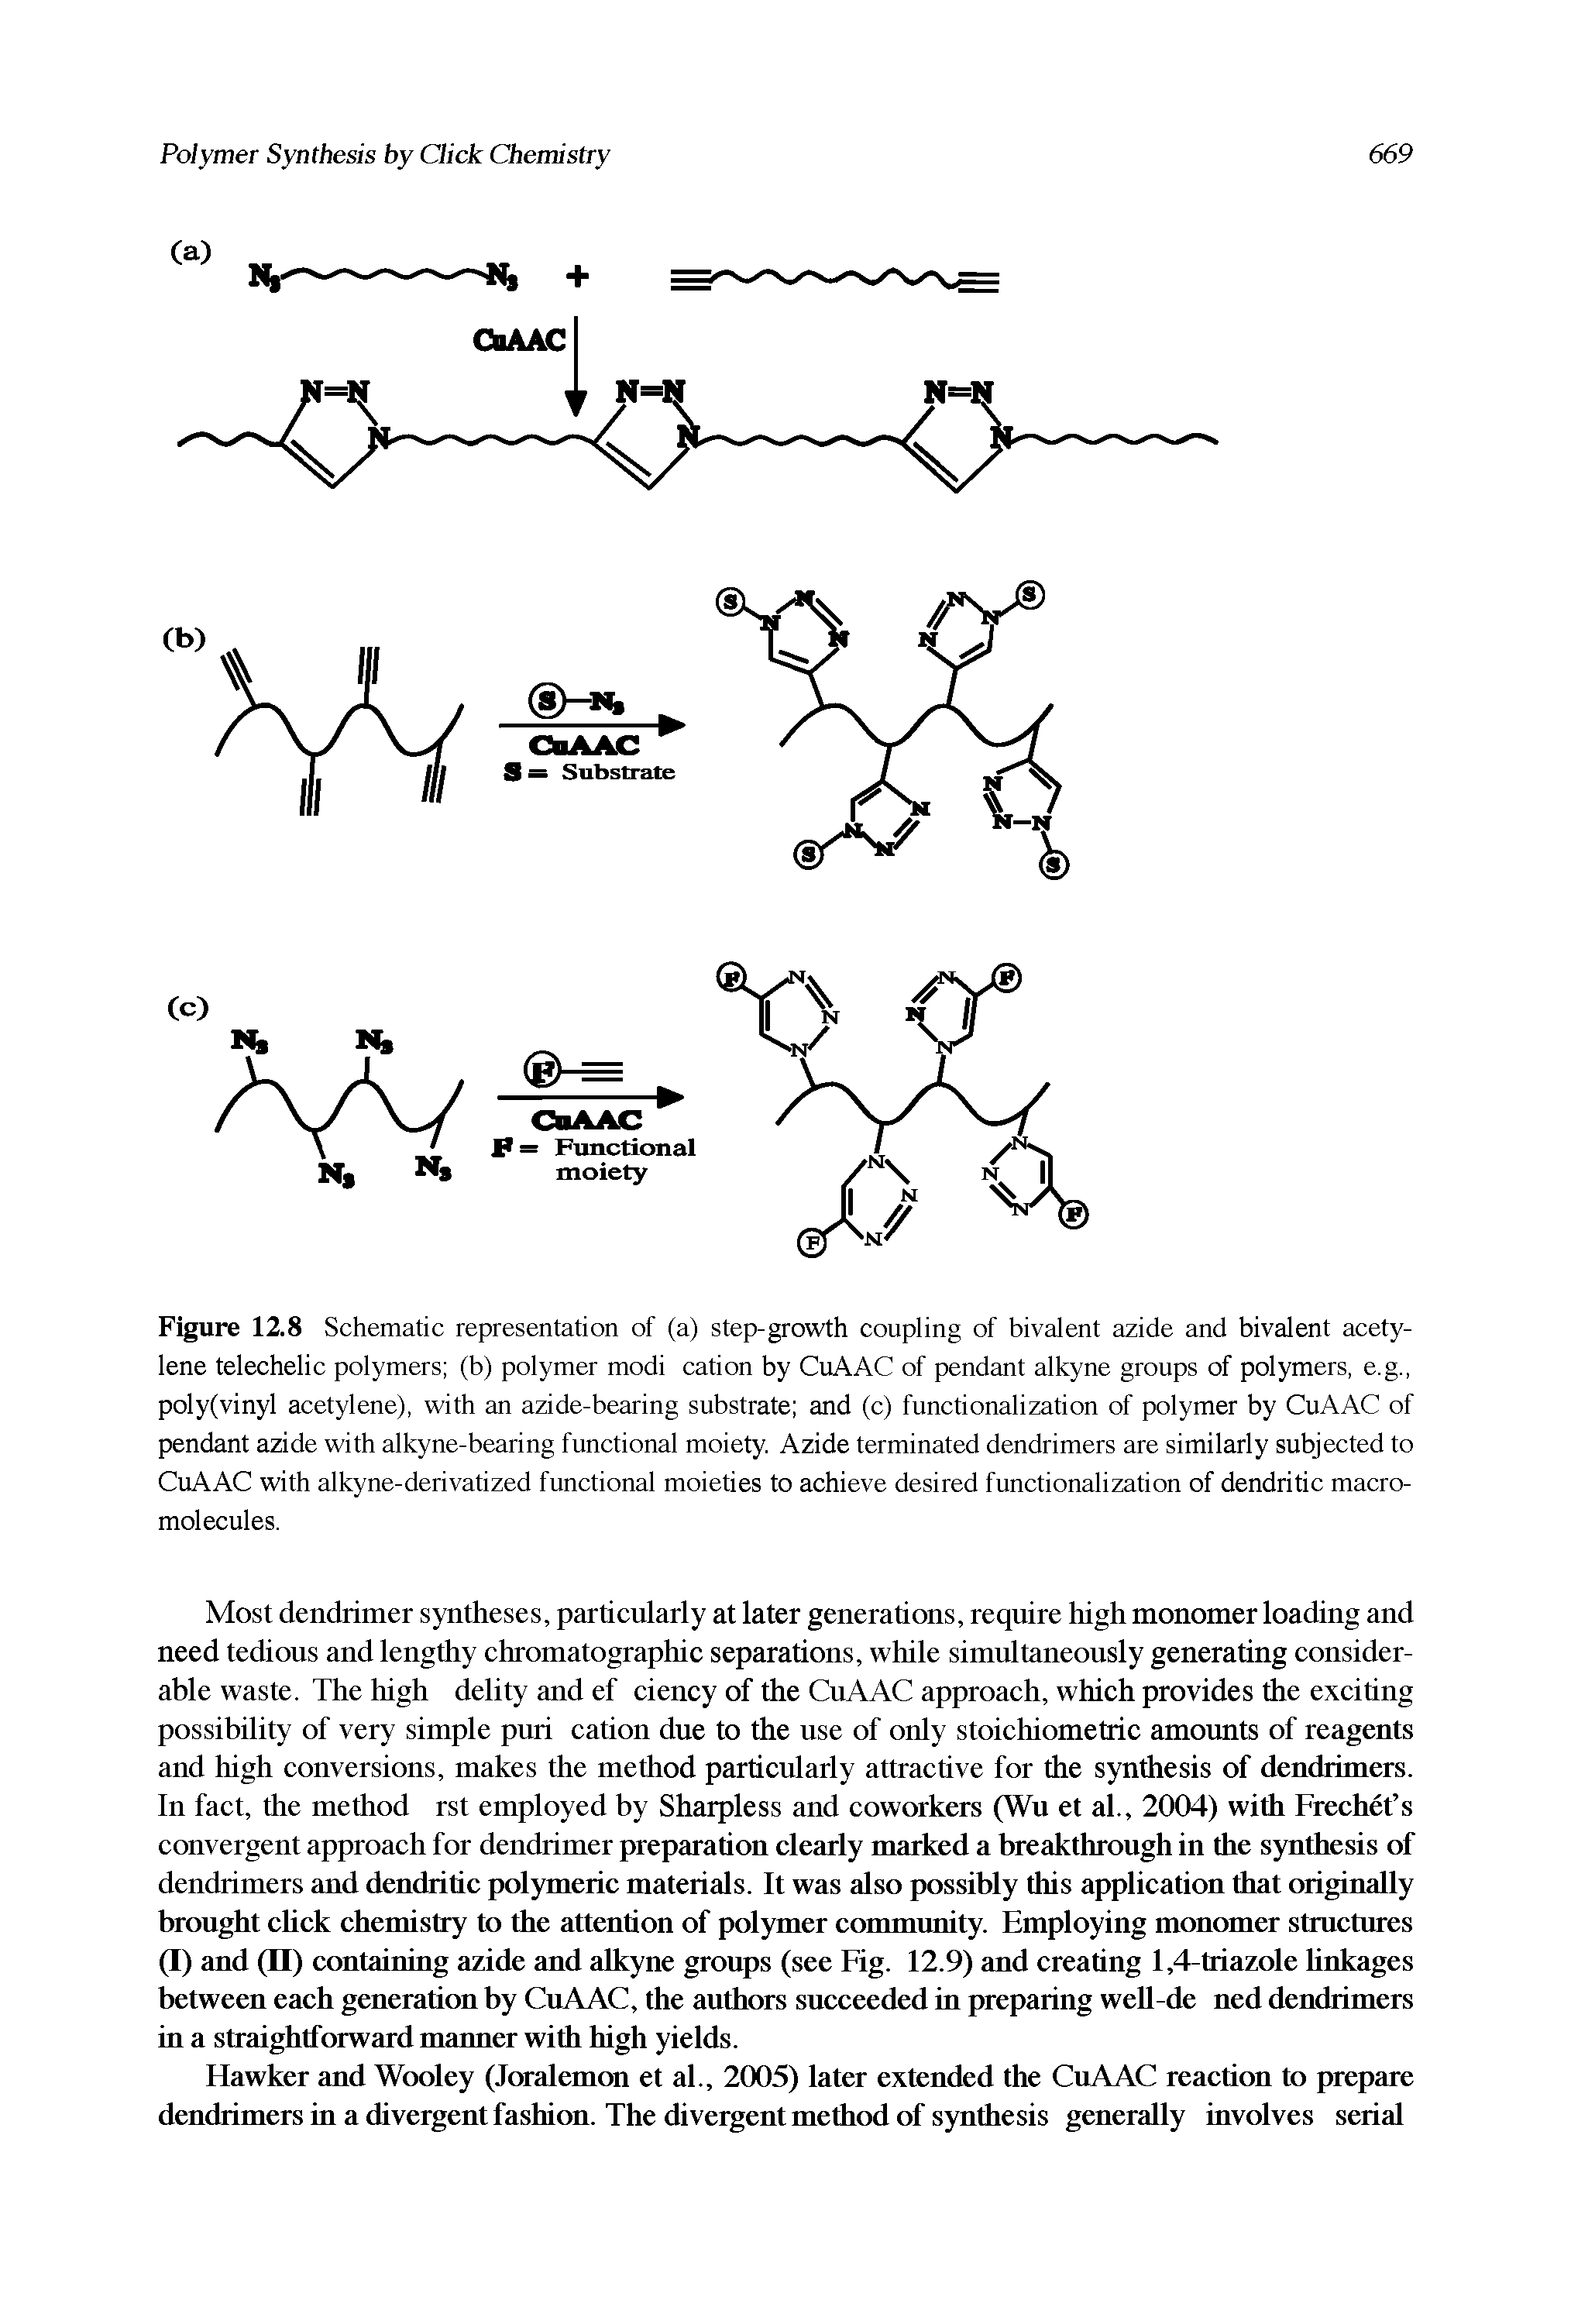 Figure 12.8 Schematic representation of (a) step-growth coupling of bivalent azide and bivalent acetylene telechelic polymers (b) polymer modi cation by CuAAC of pendant alkyne groups of polymers, e.g., poly(vinyl acetylene), with an azide-bearing substrate and (c) functionalization of polymer by CuAAC of pendant azide with alkyne-bearing functional moiety. Azide terminated dendrimers are similarly subjected to CuAAC with alkyne-derivatized functional moieties to achieve desired functionalization of dendritic macromolecules.